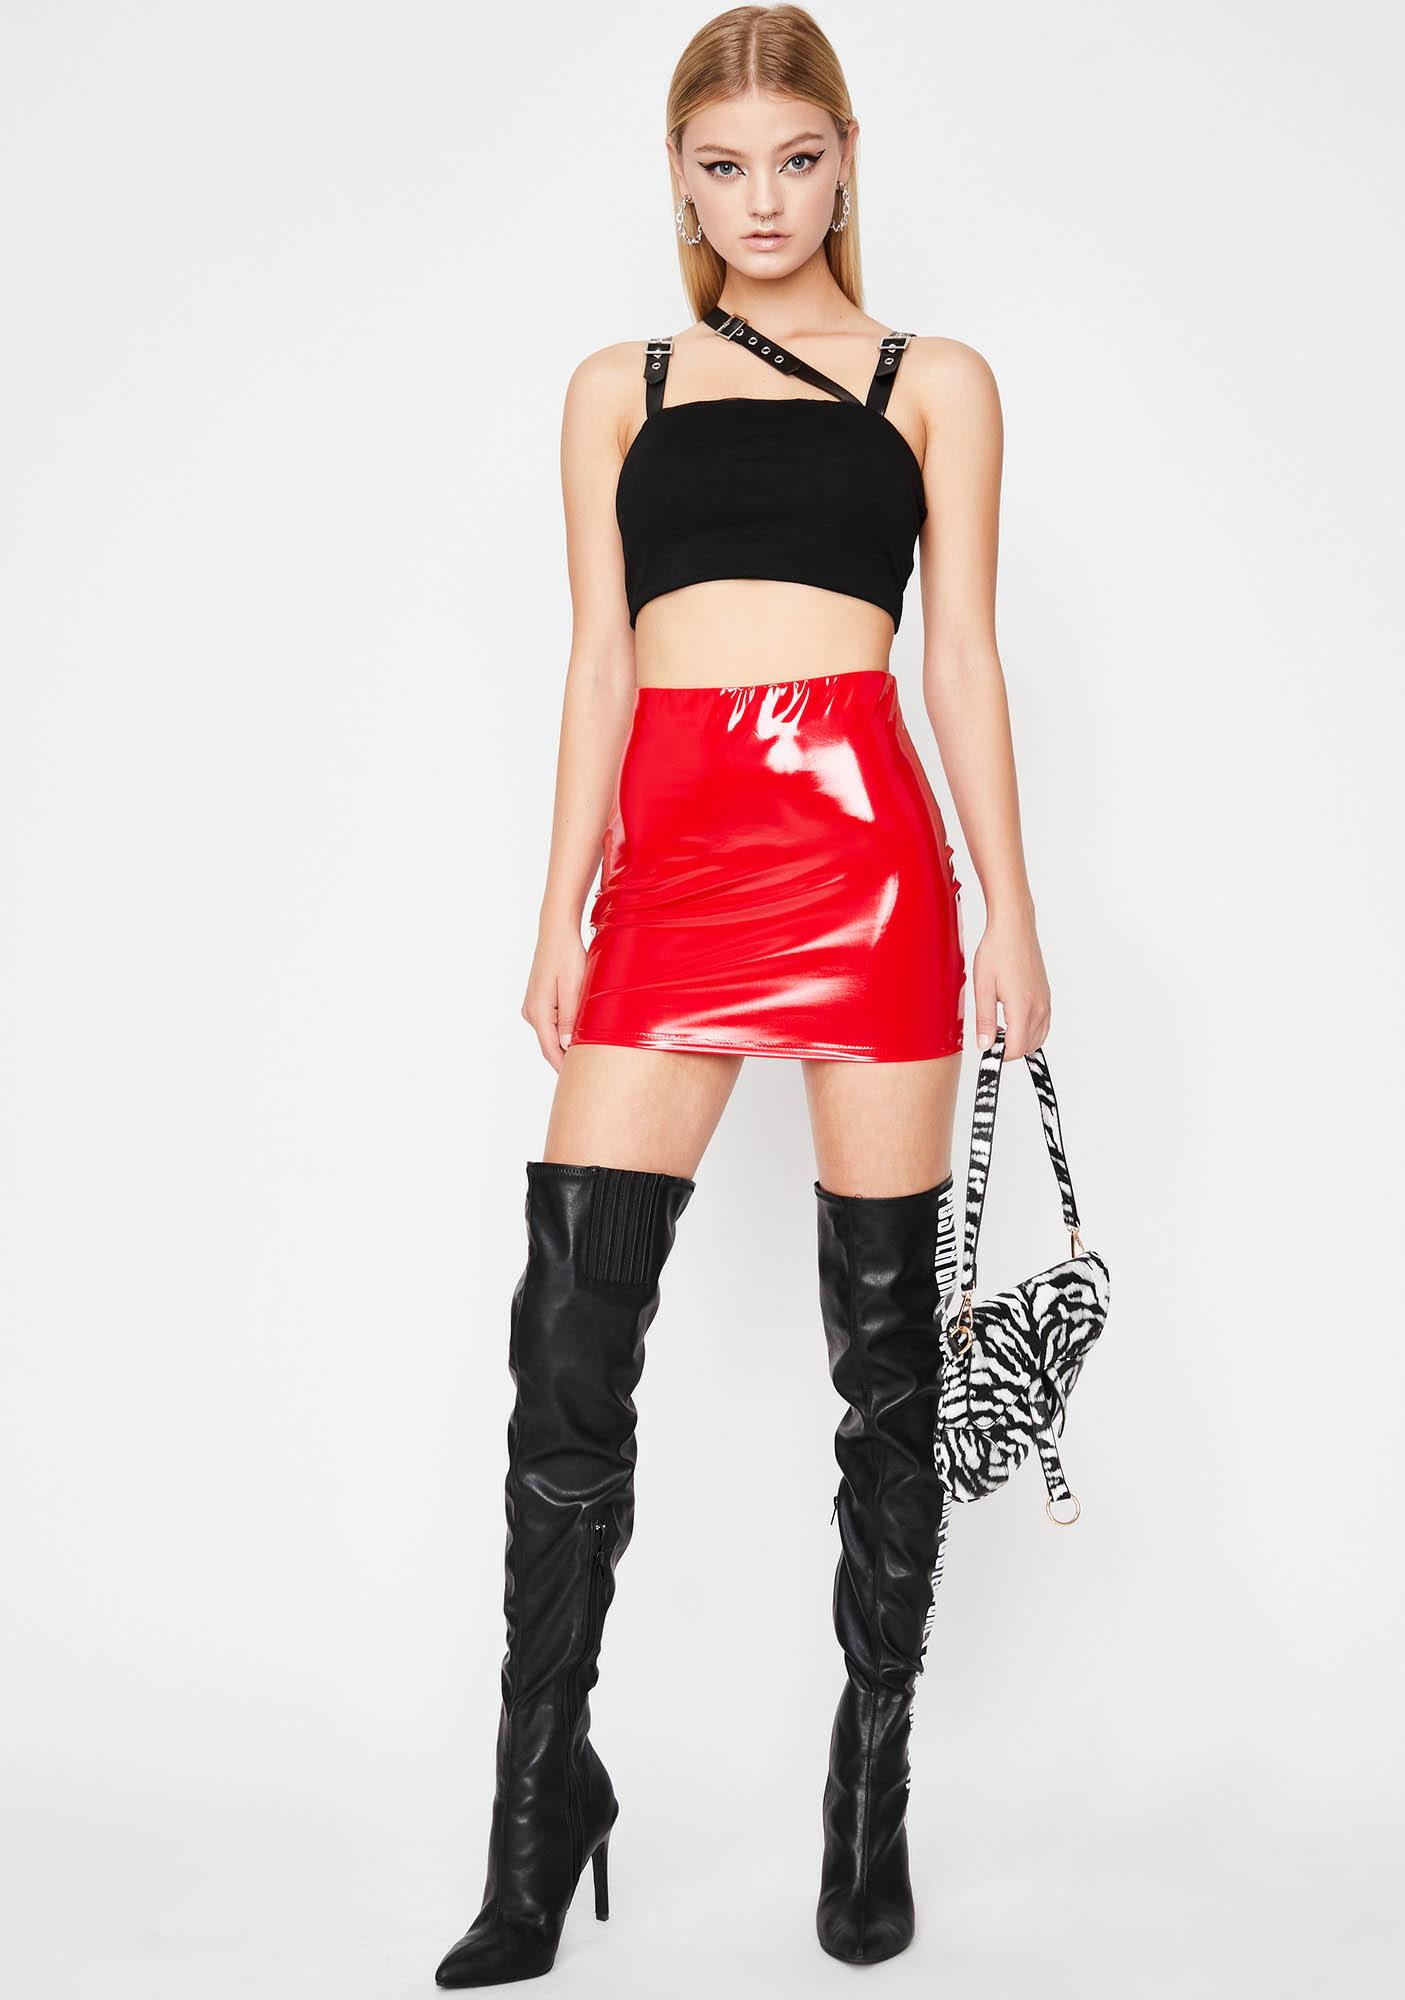 red vinyl skirt outfit